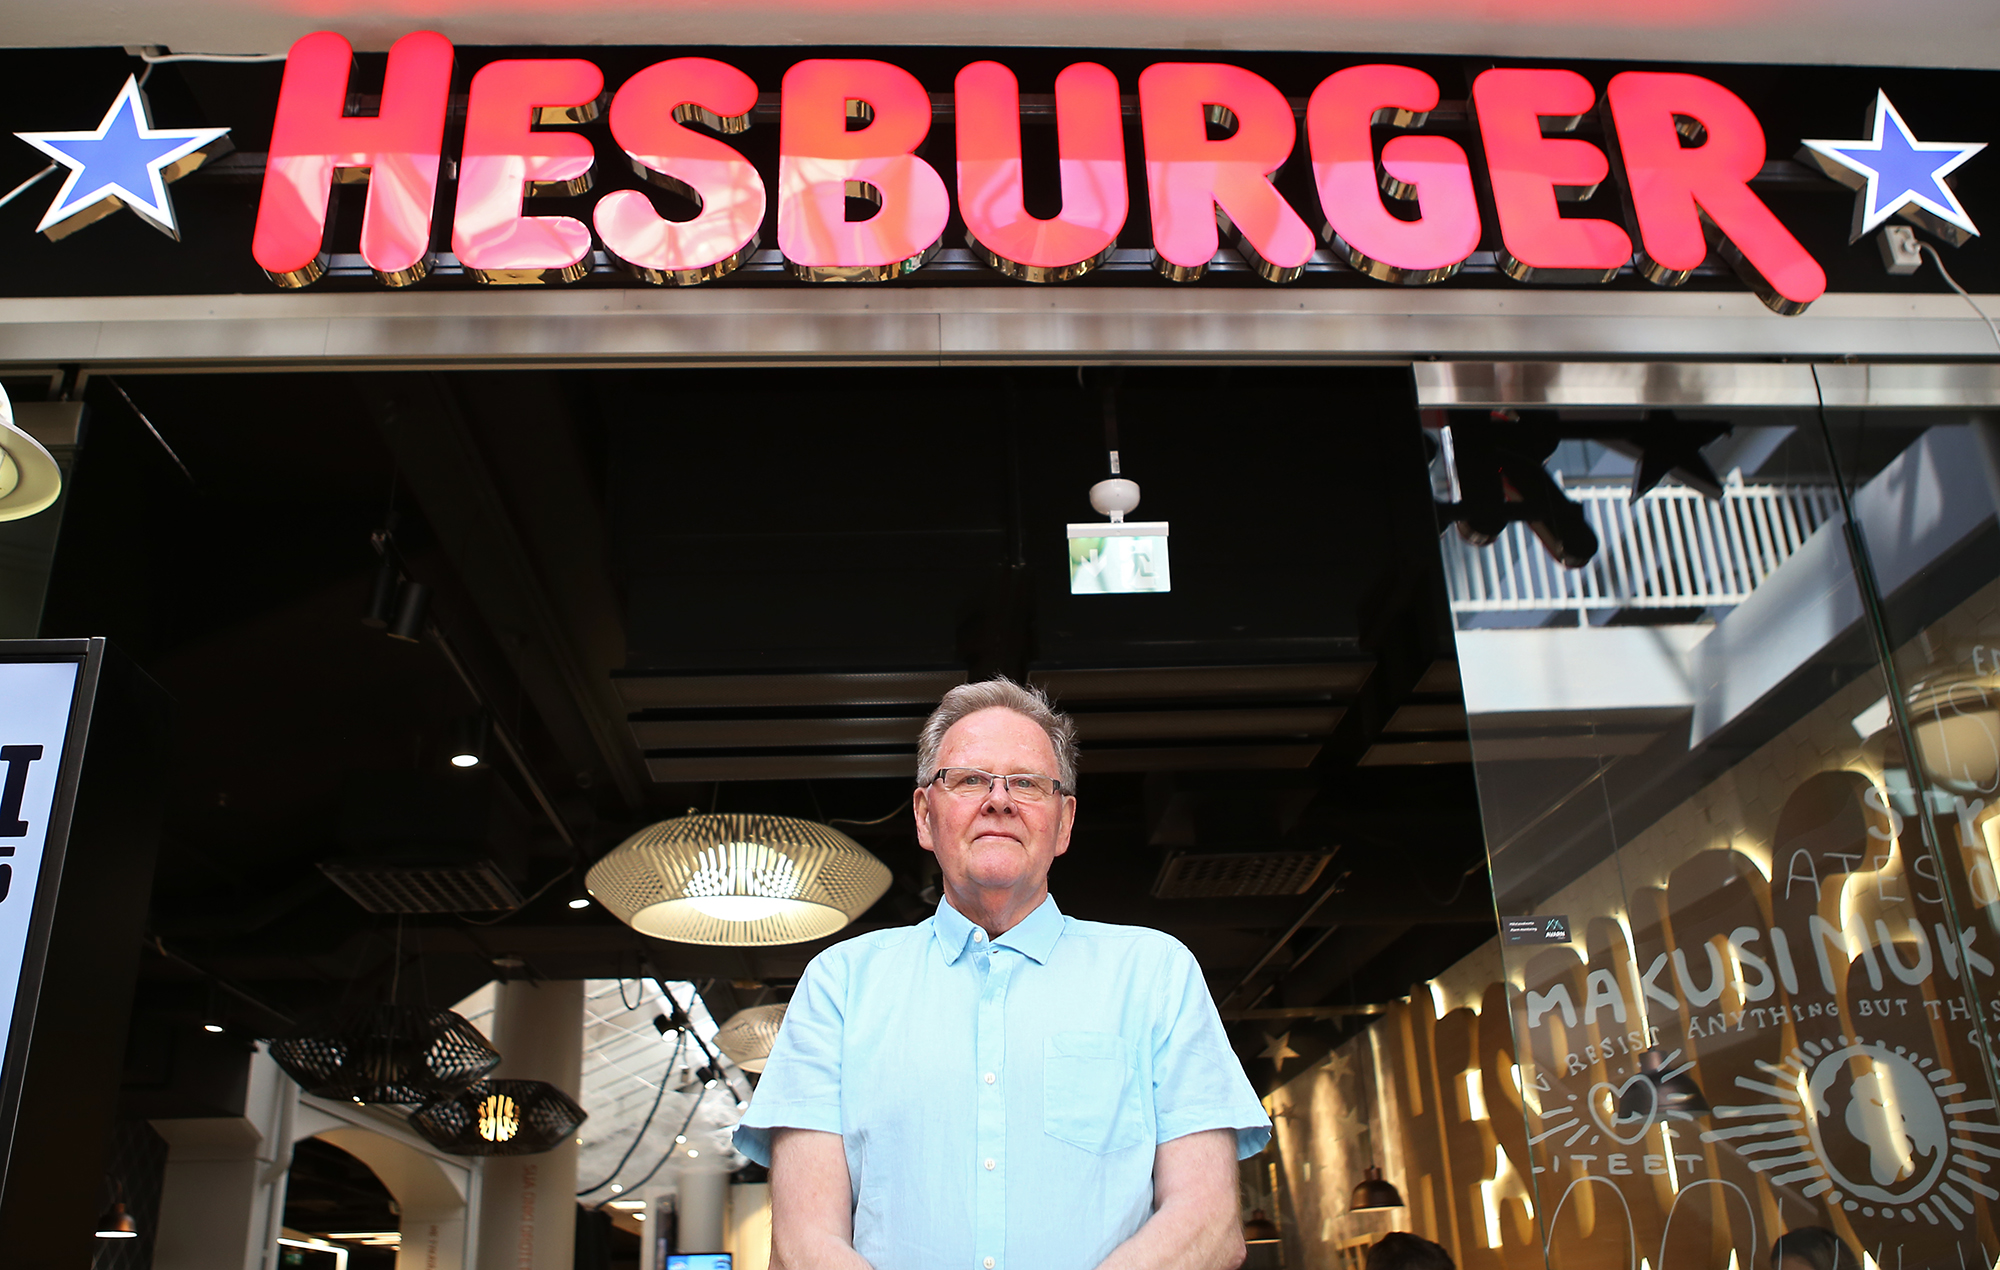 Hesburger founder blames middle management, Covid crisis for staff dissatisfaction